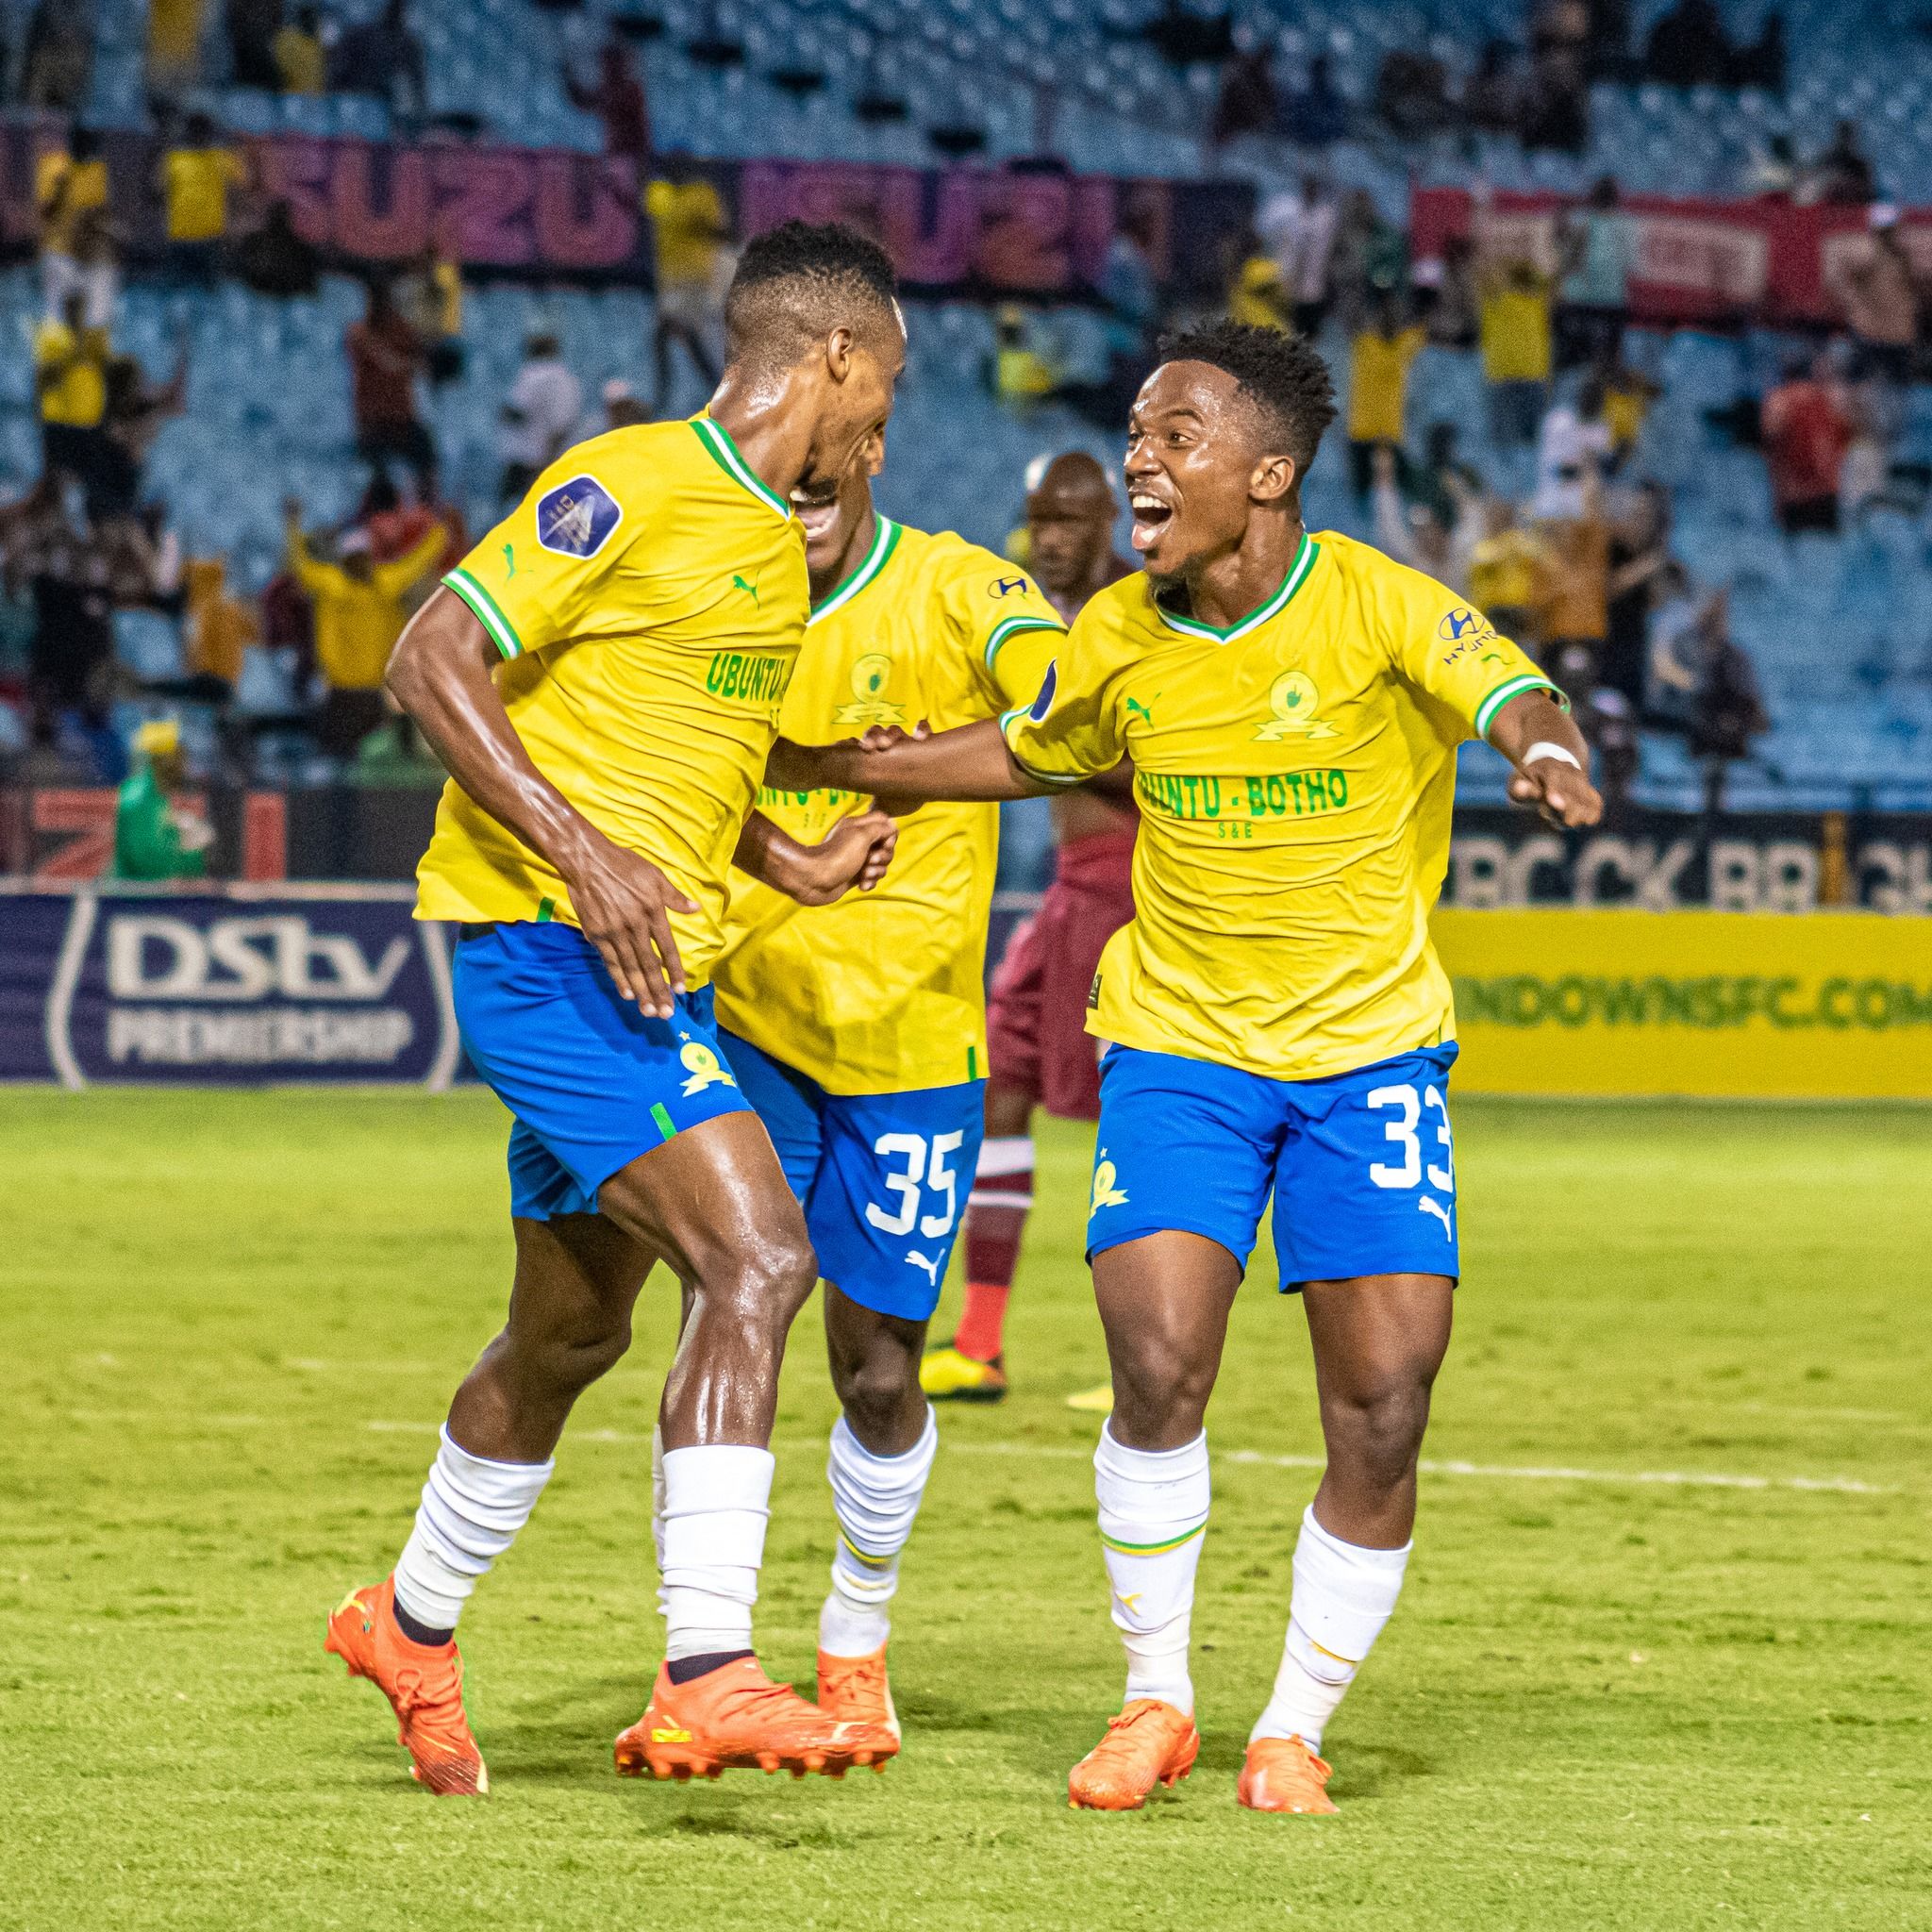 The are spoils are shared at - Mamelodi Sundowns FC